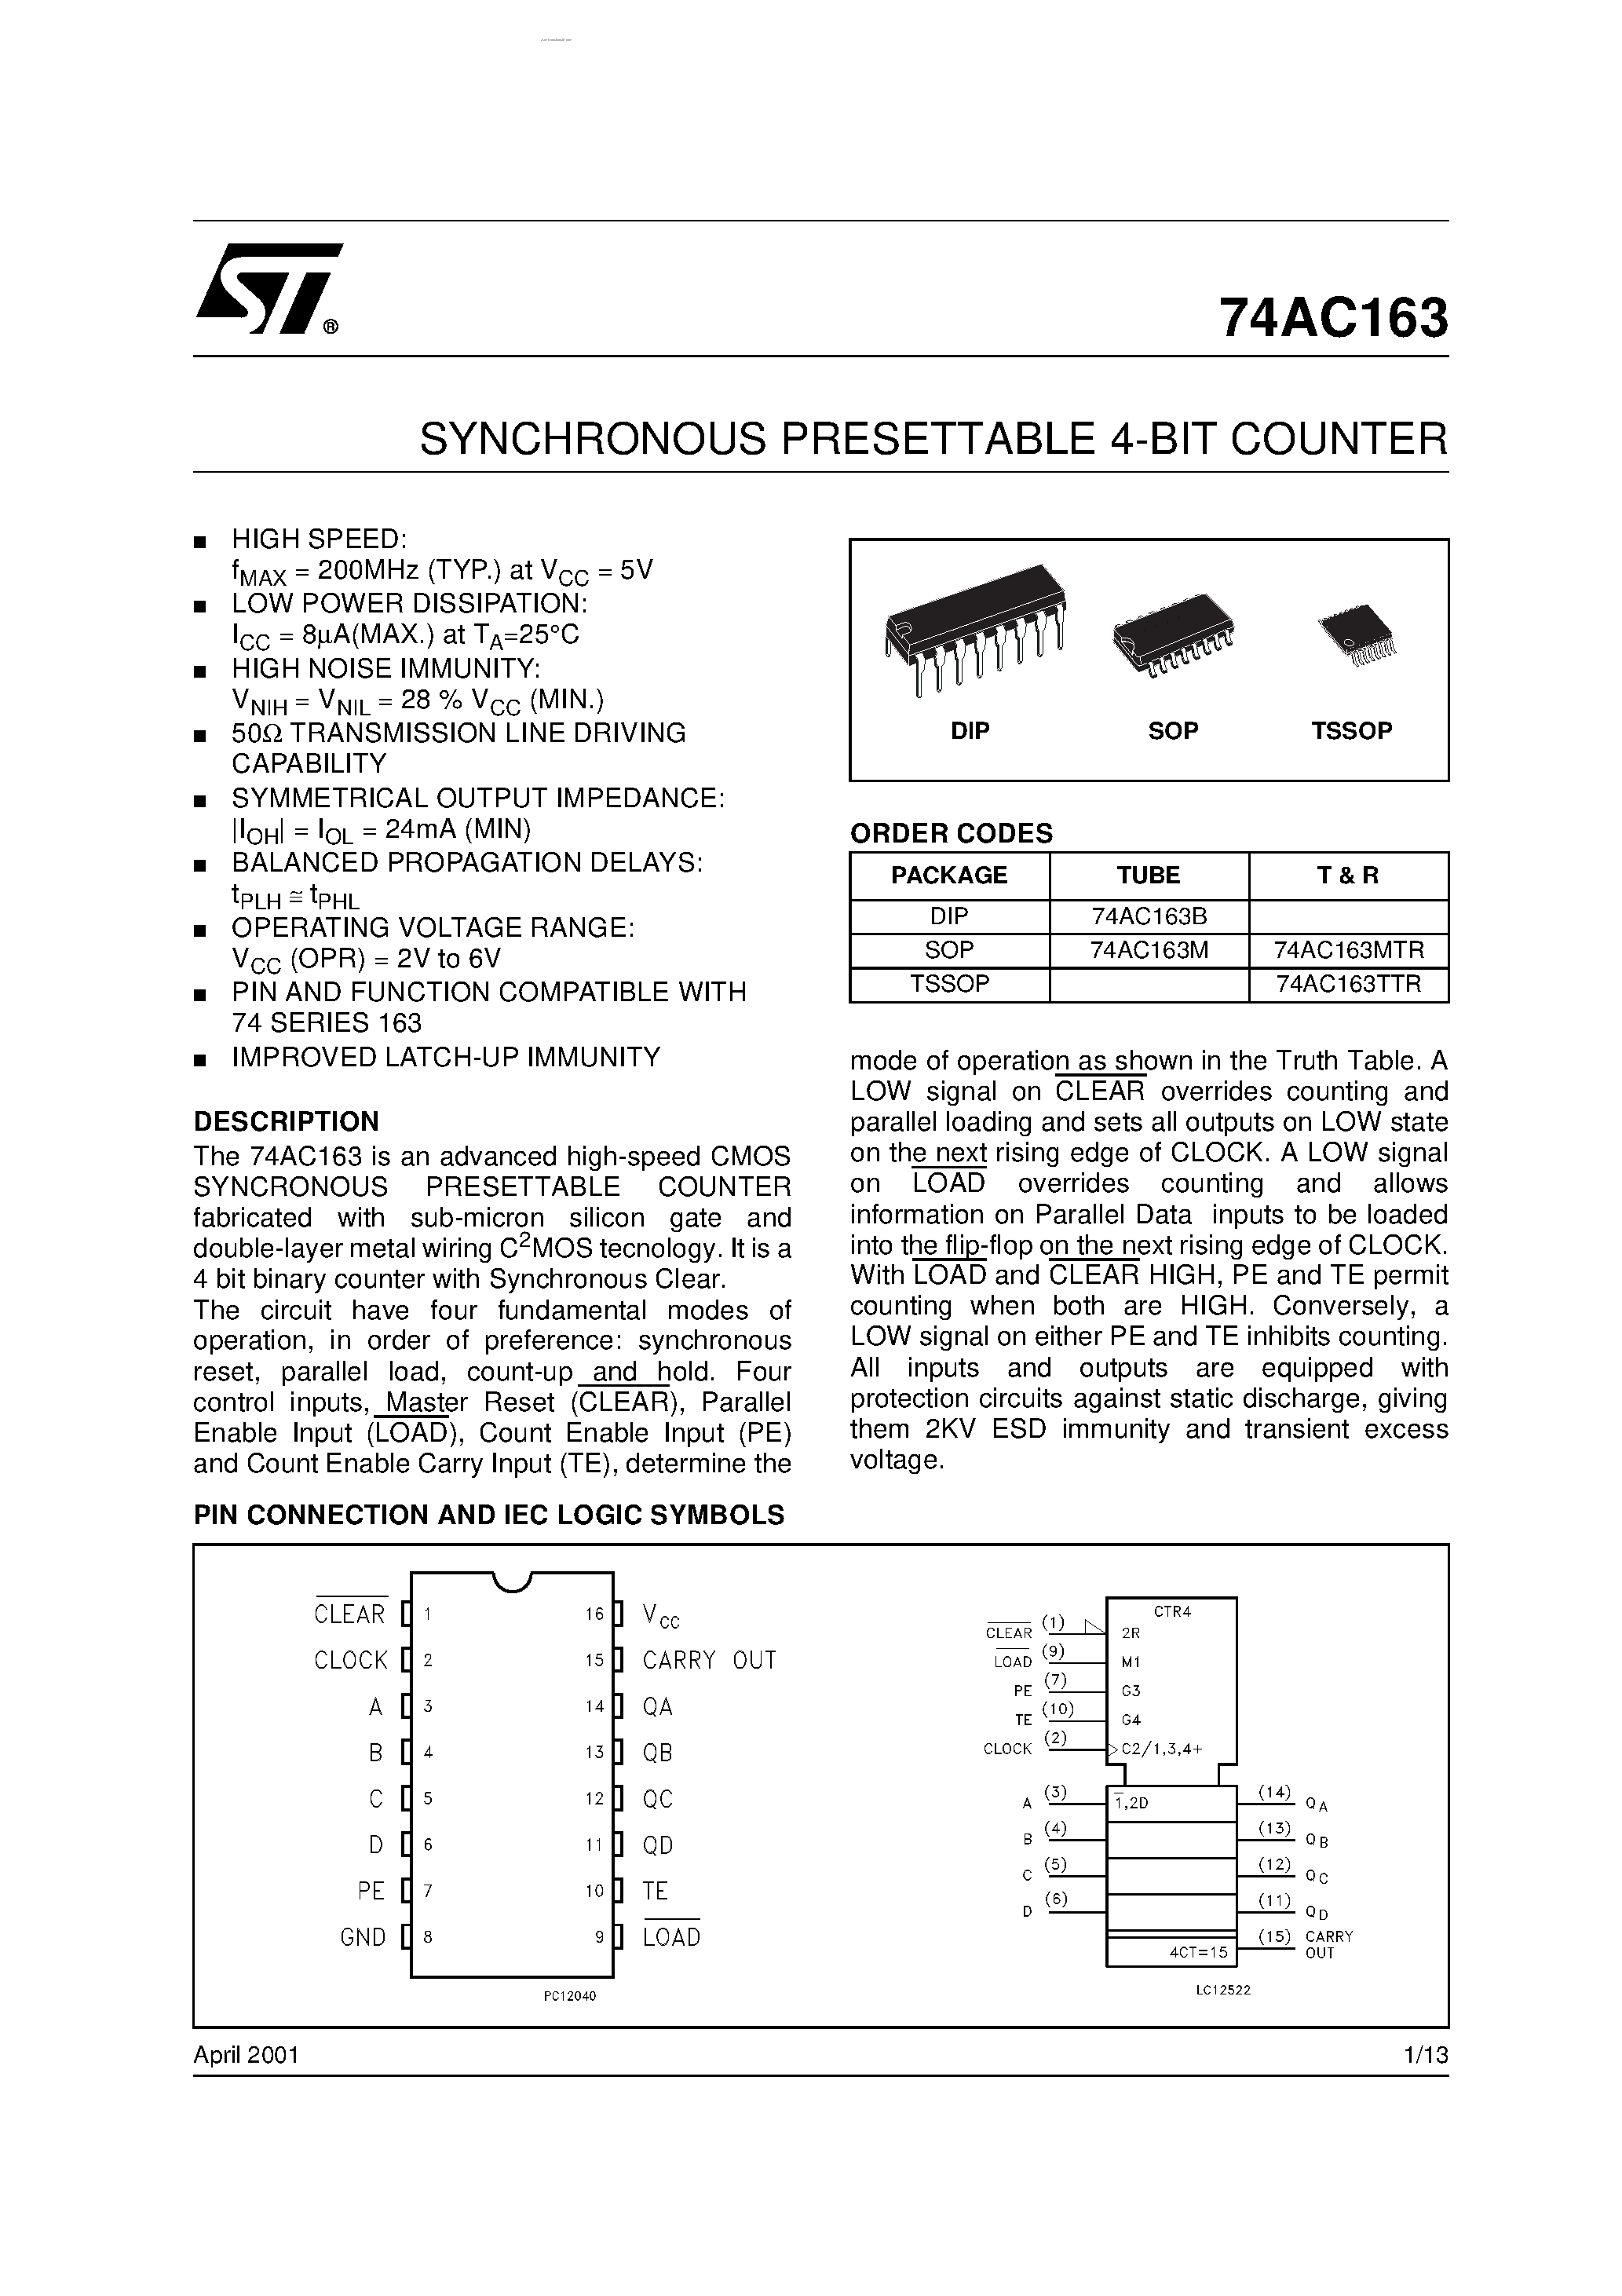 Datasheet 74AC163 - SYNCHRONOUS PRESETTABLE 4-BIT COUNTER page 1